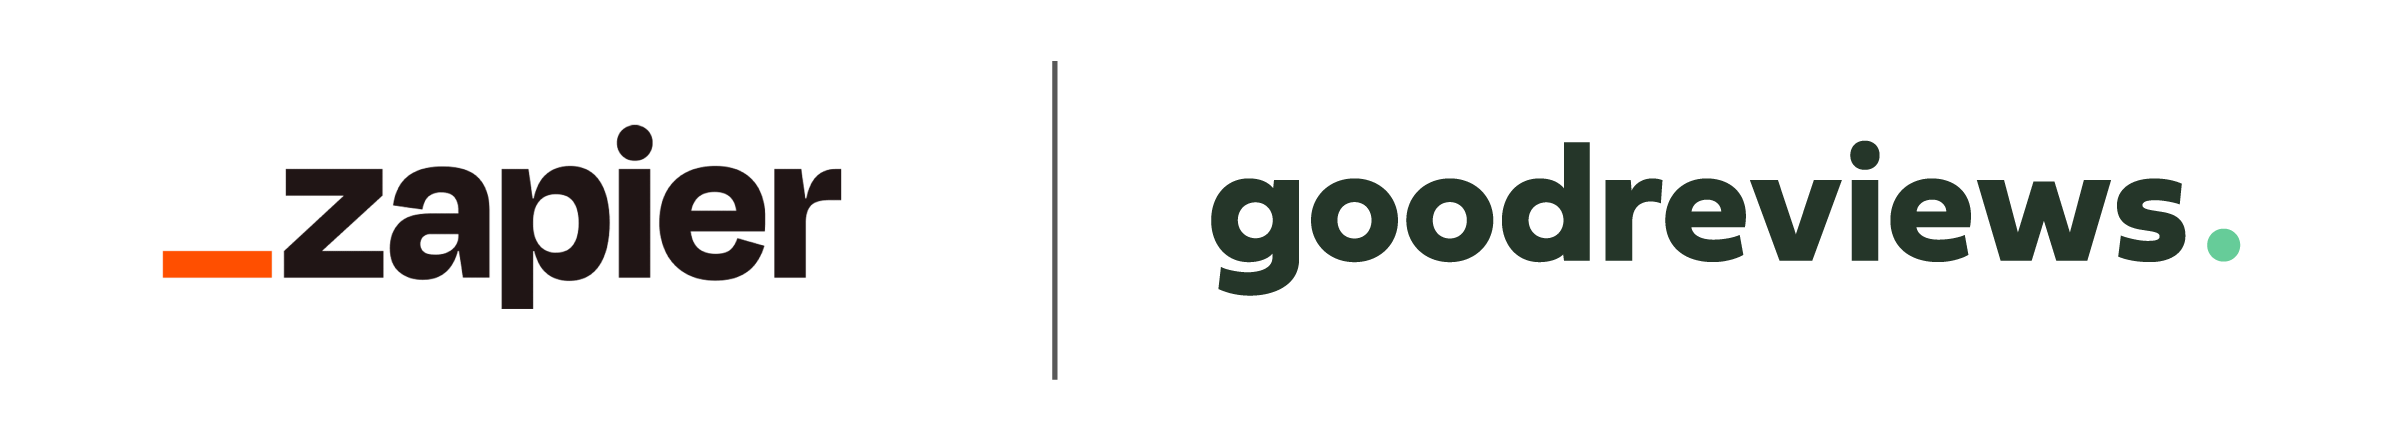 Zapier and Goodreviews logo to represent the partnership to automatically collect Google Reviews.